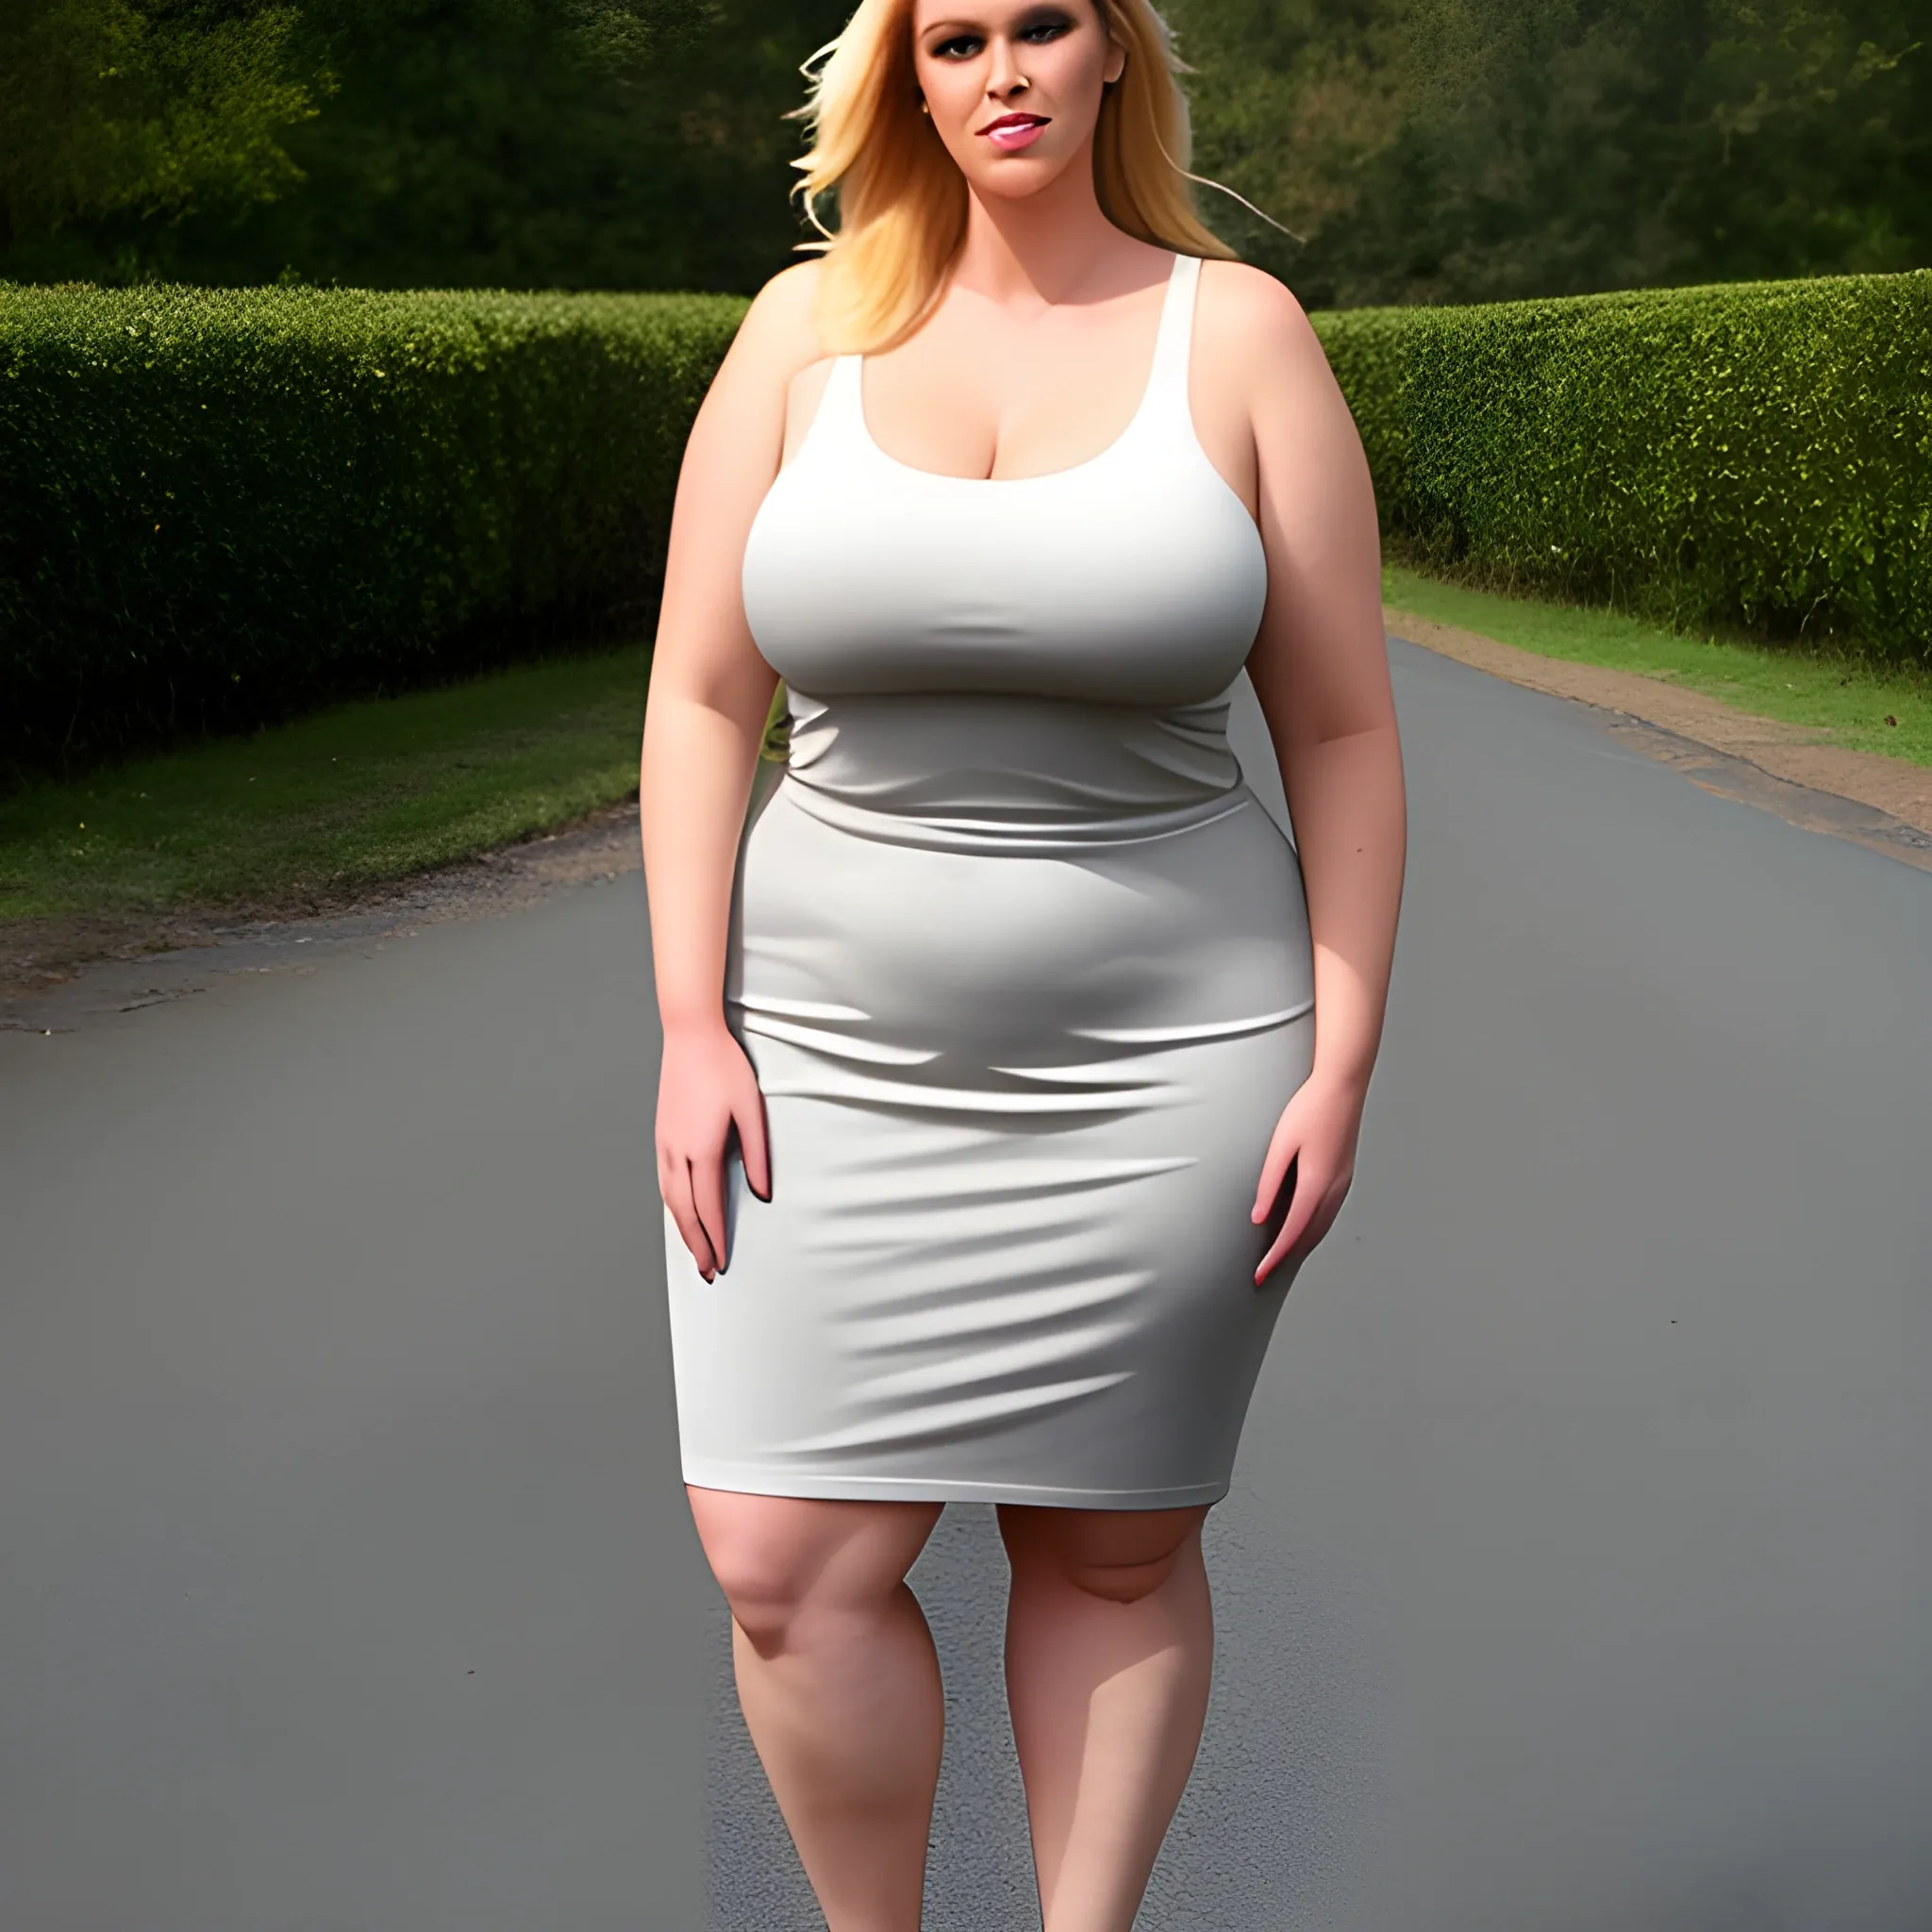 so young and so tall : large 8ft tall friendly blonde plus size ...